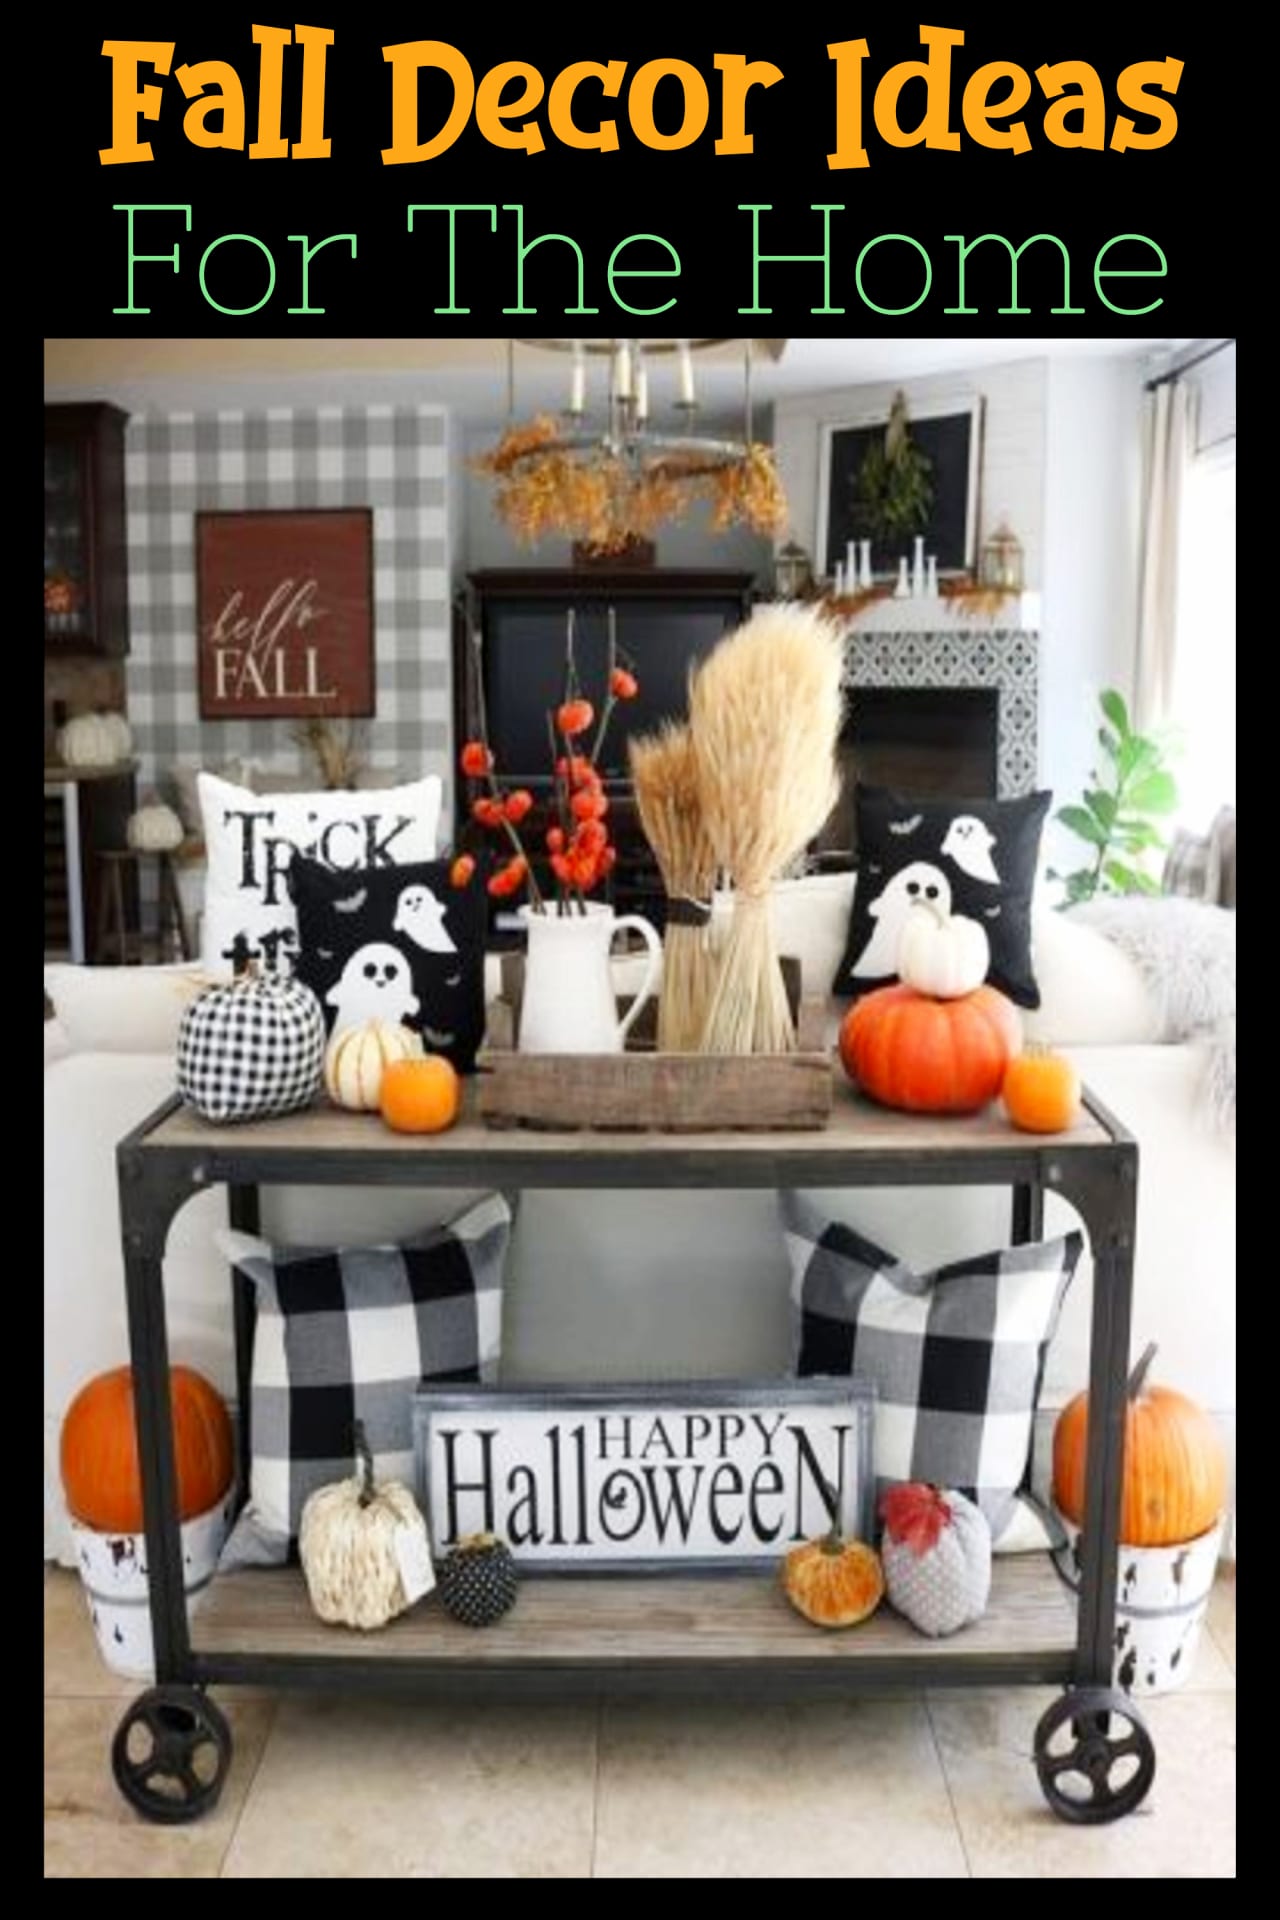 Fall Decor Ideas for the Home - unique DIY decorating ideas for Halloween, Fall, Thanksgiving, Autumn - Fall decor ideas for living room to decorate your living room or den for Halloween